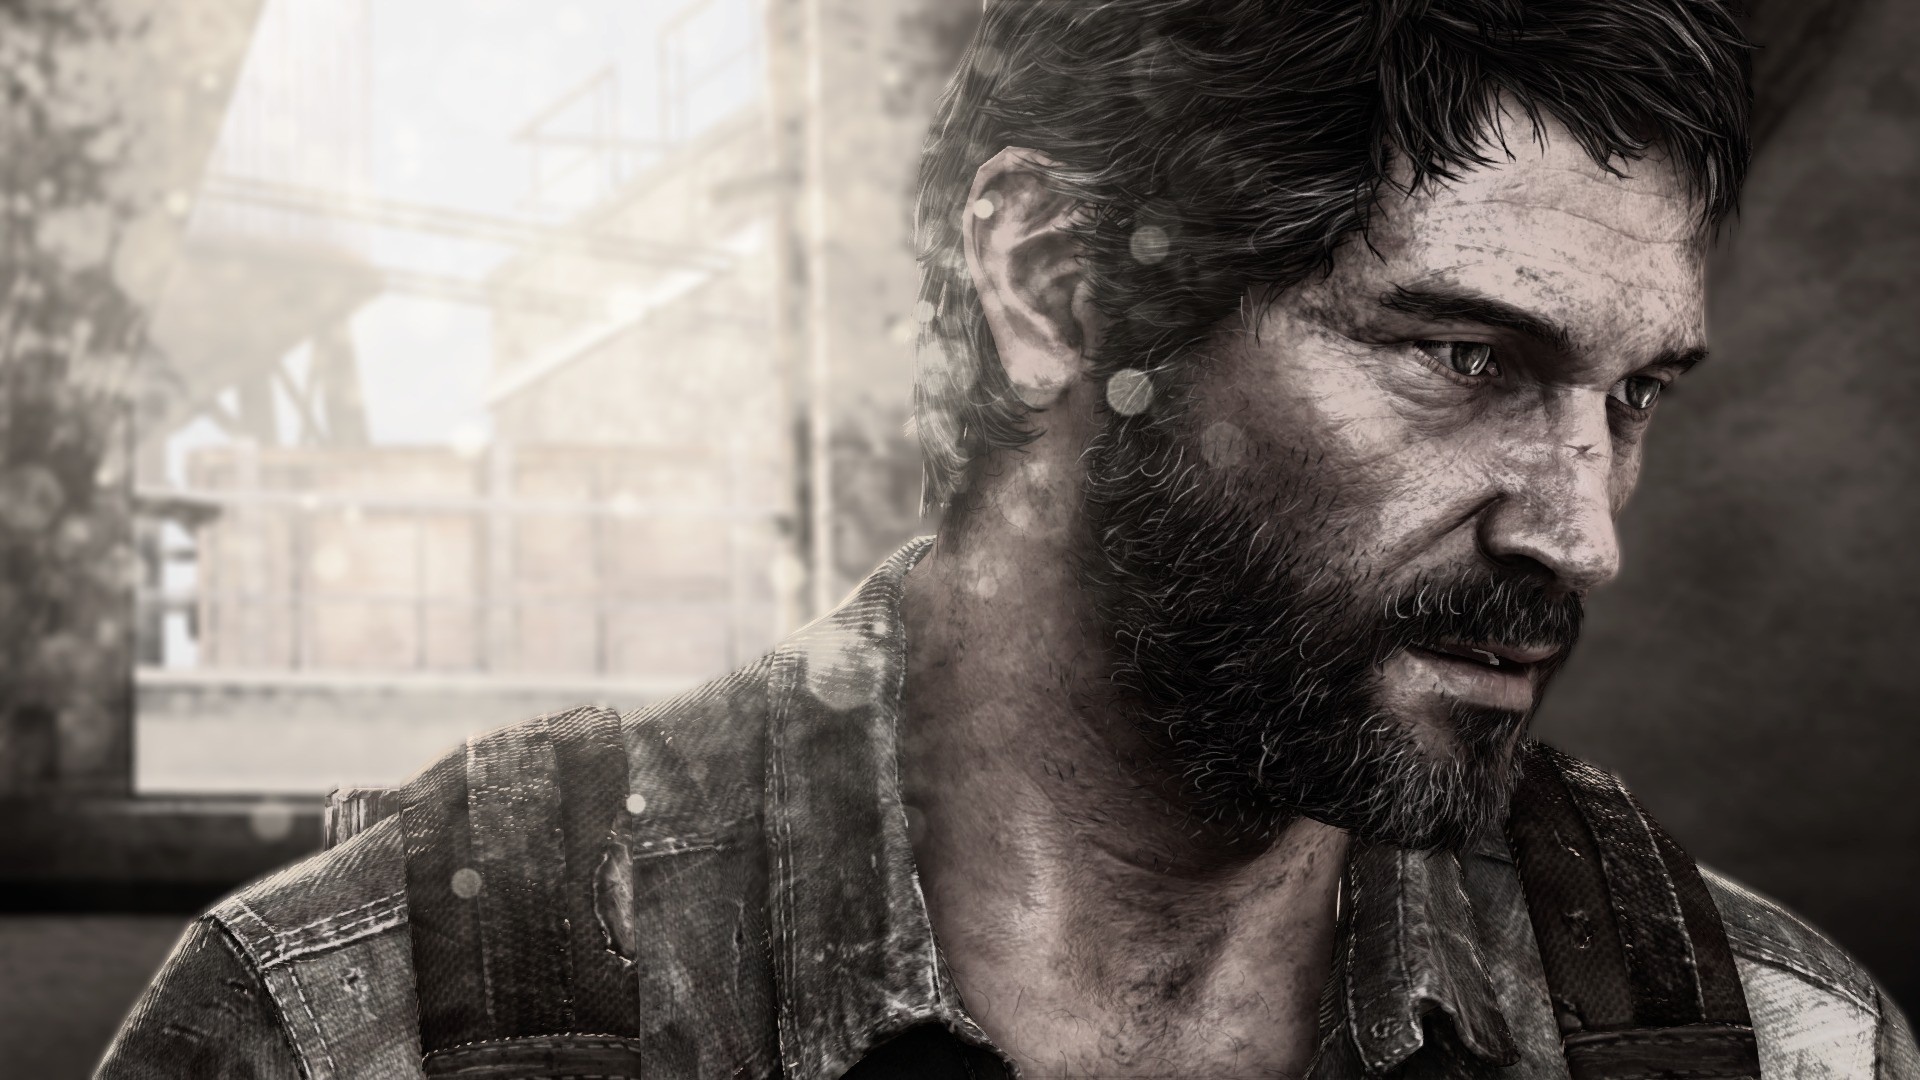 the last of us wallpaper,human,facial hair,photography,beard,black and white